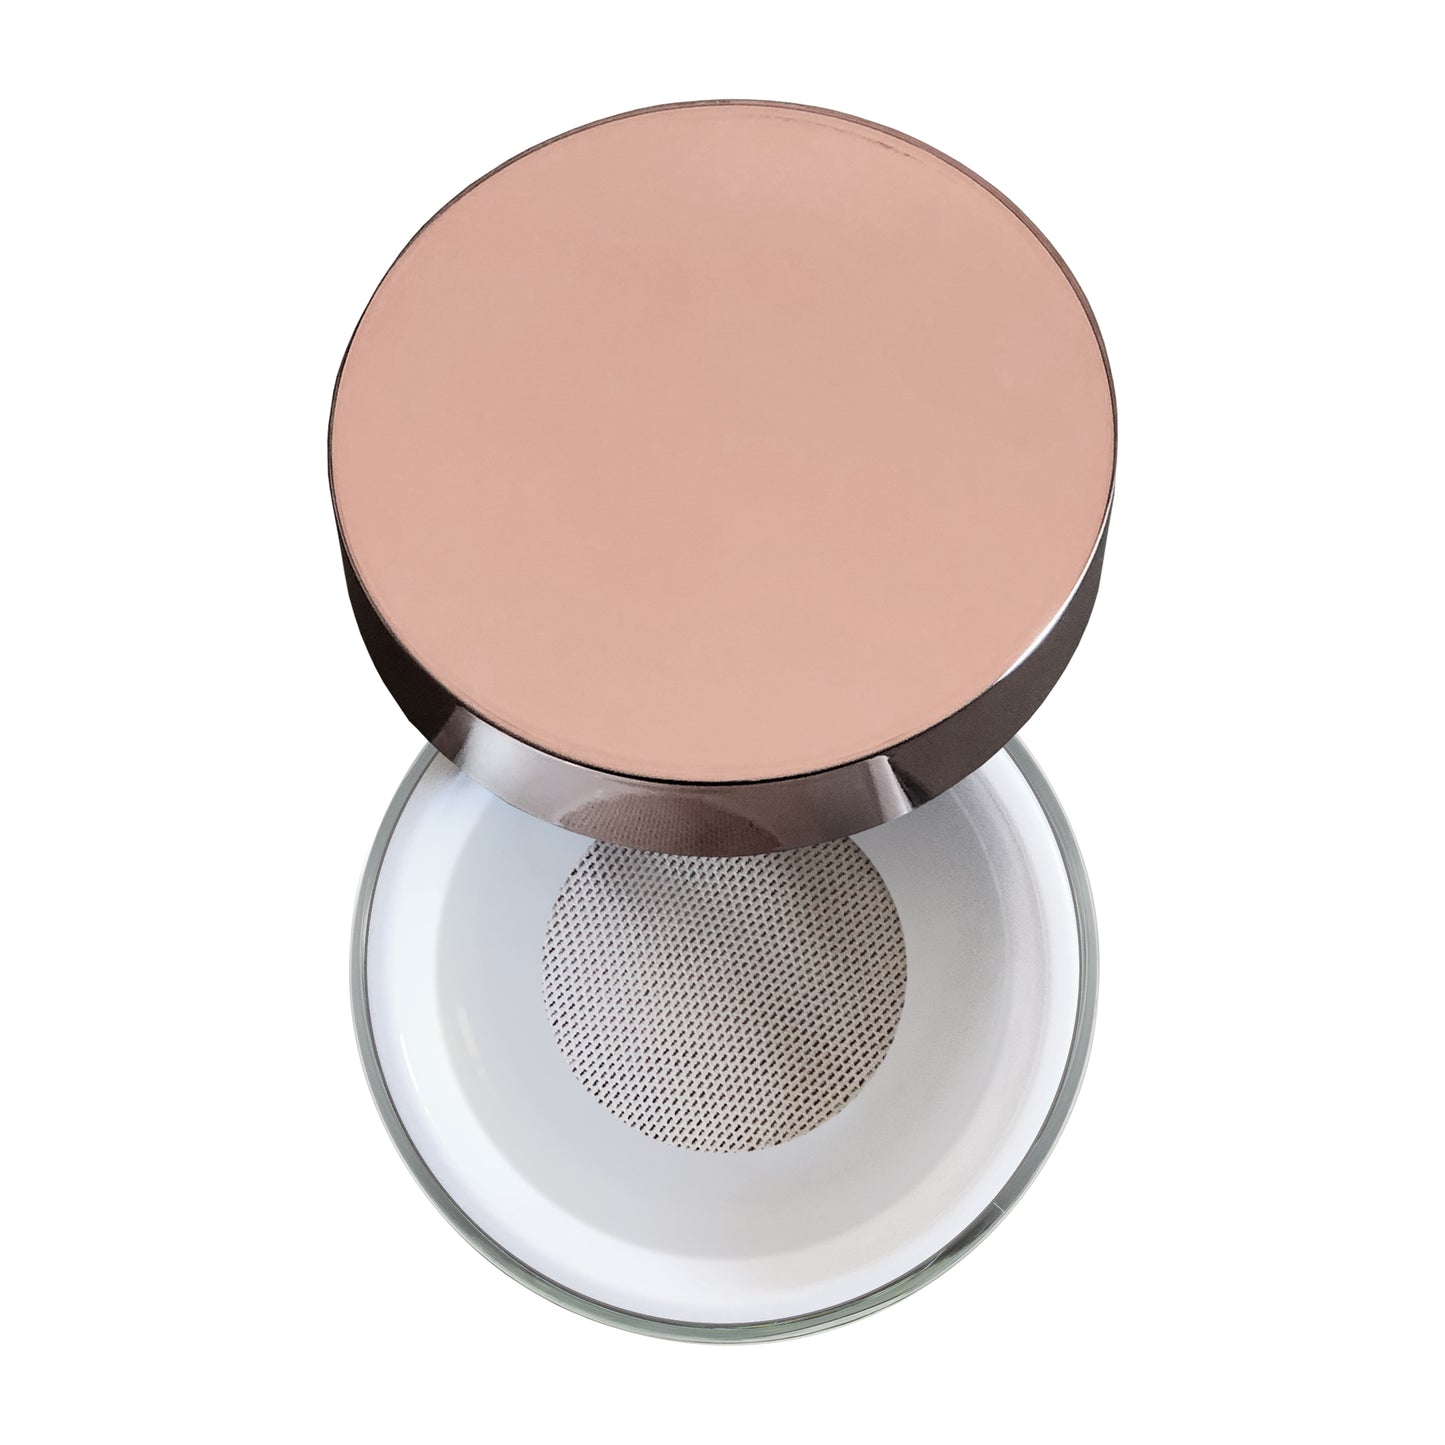 Delilah Pure Touch Microfine Loose Powder